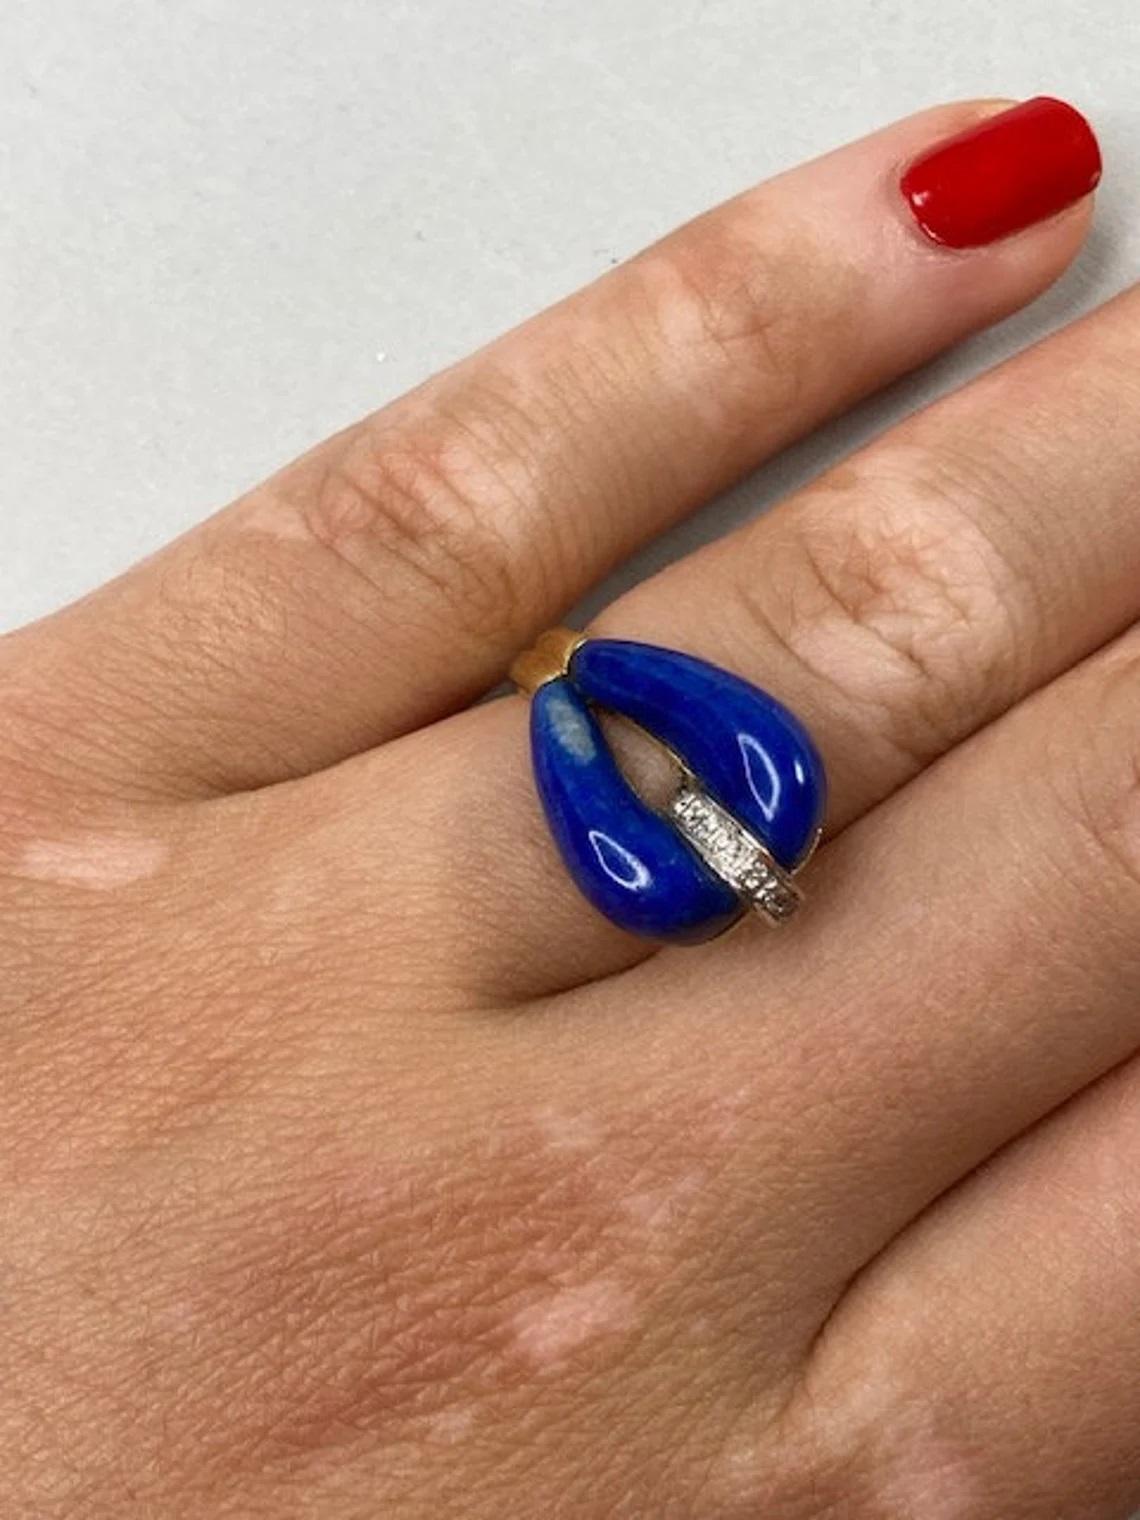 Vintage 14k Gold Lapis Lazuli Teardrop Ring with Diamonds, One-of-a-kind

This stunning teardrop lapis lazuli ring with a trail of sparkling diamonds is set in 14k yellow gold. This vintage piece is perfect for everyday wear or for a special